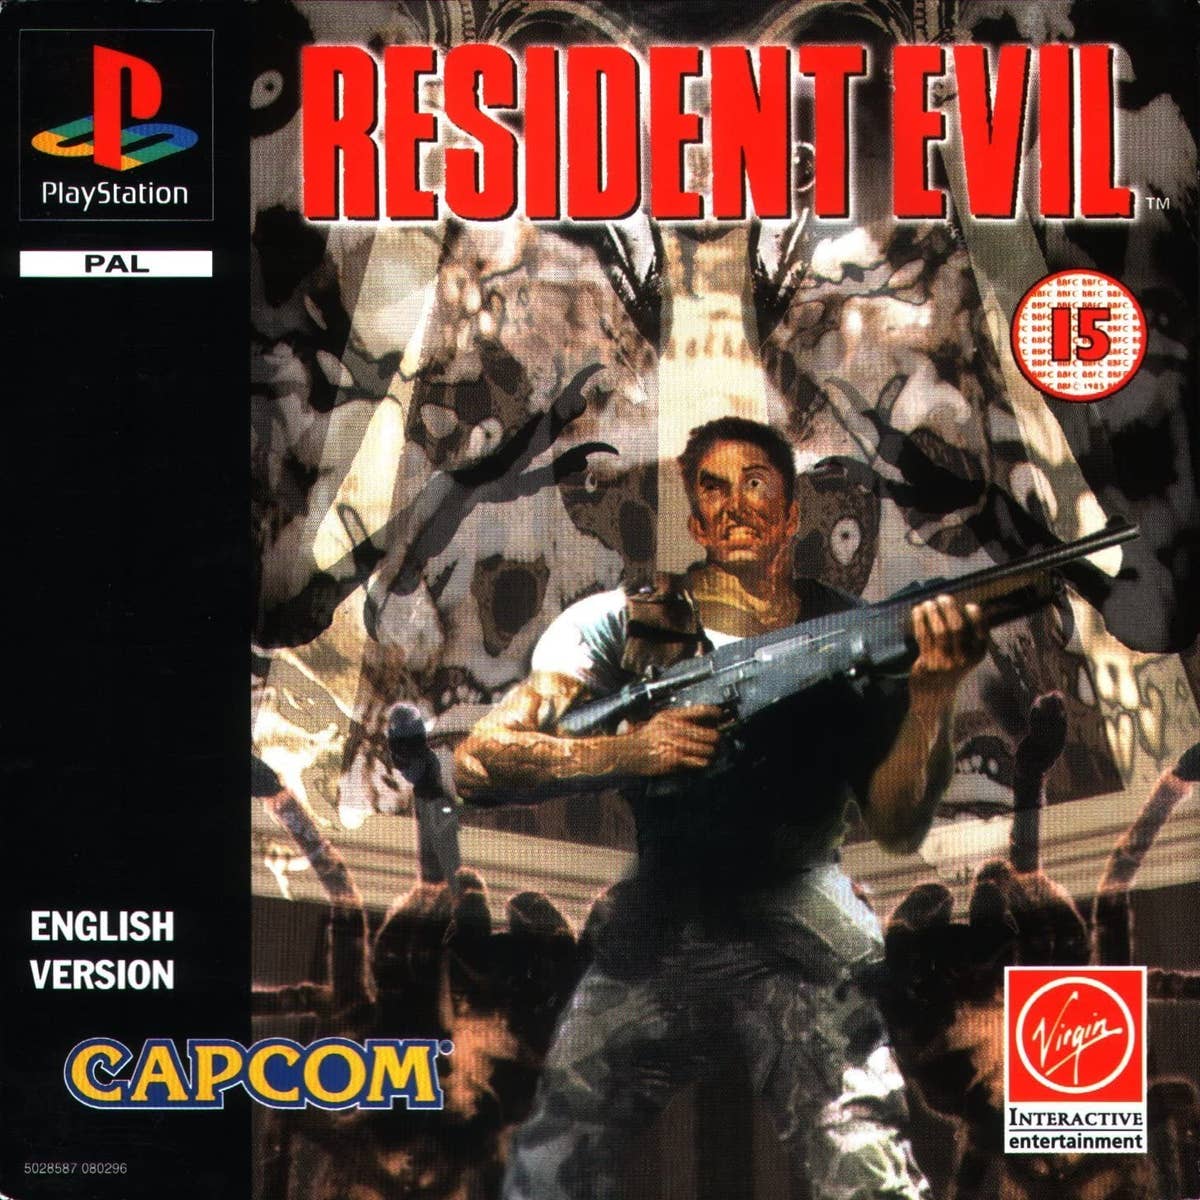 Resident Evil Timeline Explained: From RE1 to Village